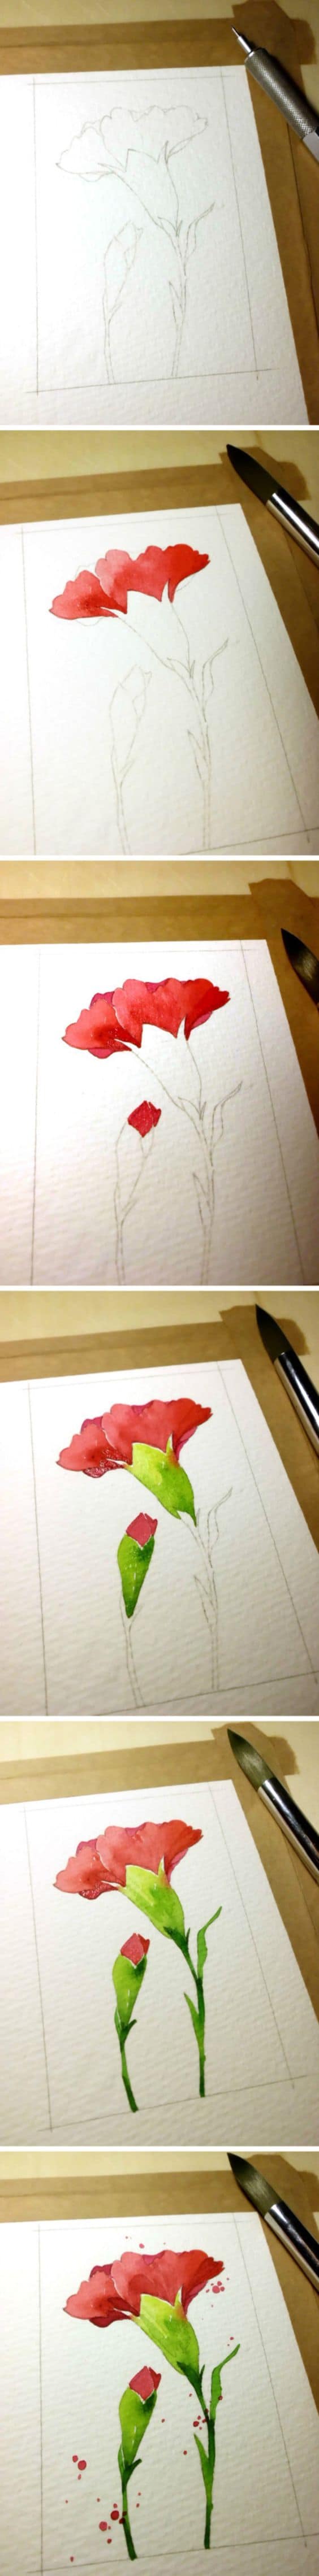 1. DRAW BRIGHT RED CARNATIONS STARTING WITH A SKETCH AND TWO BASIC TONES